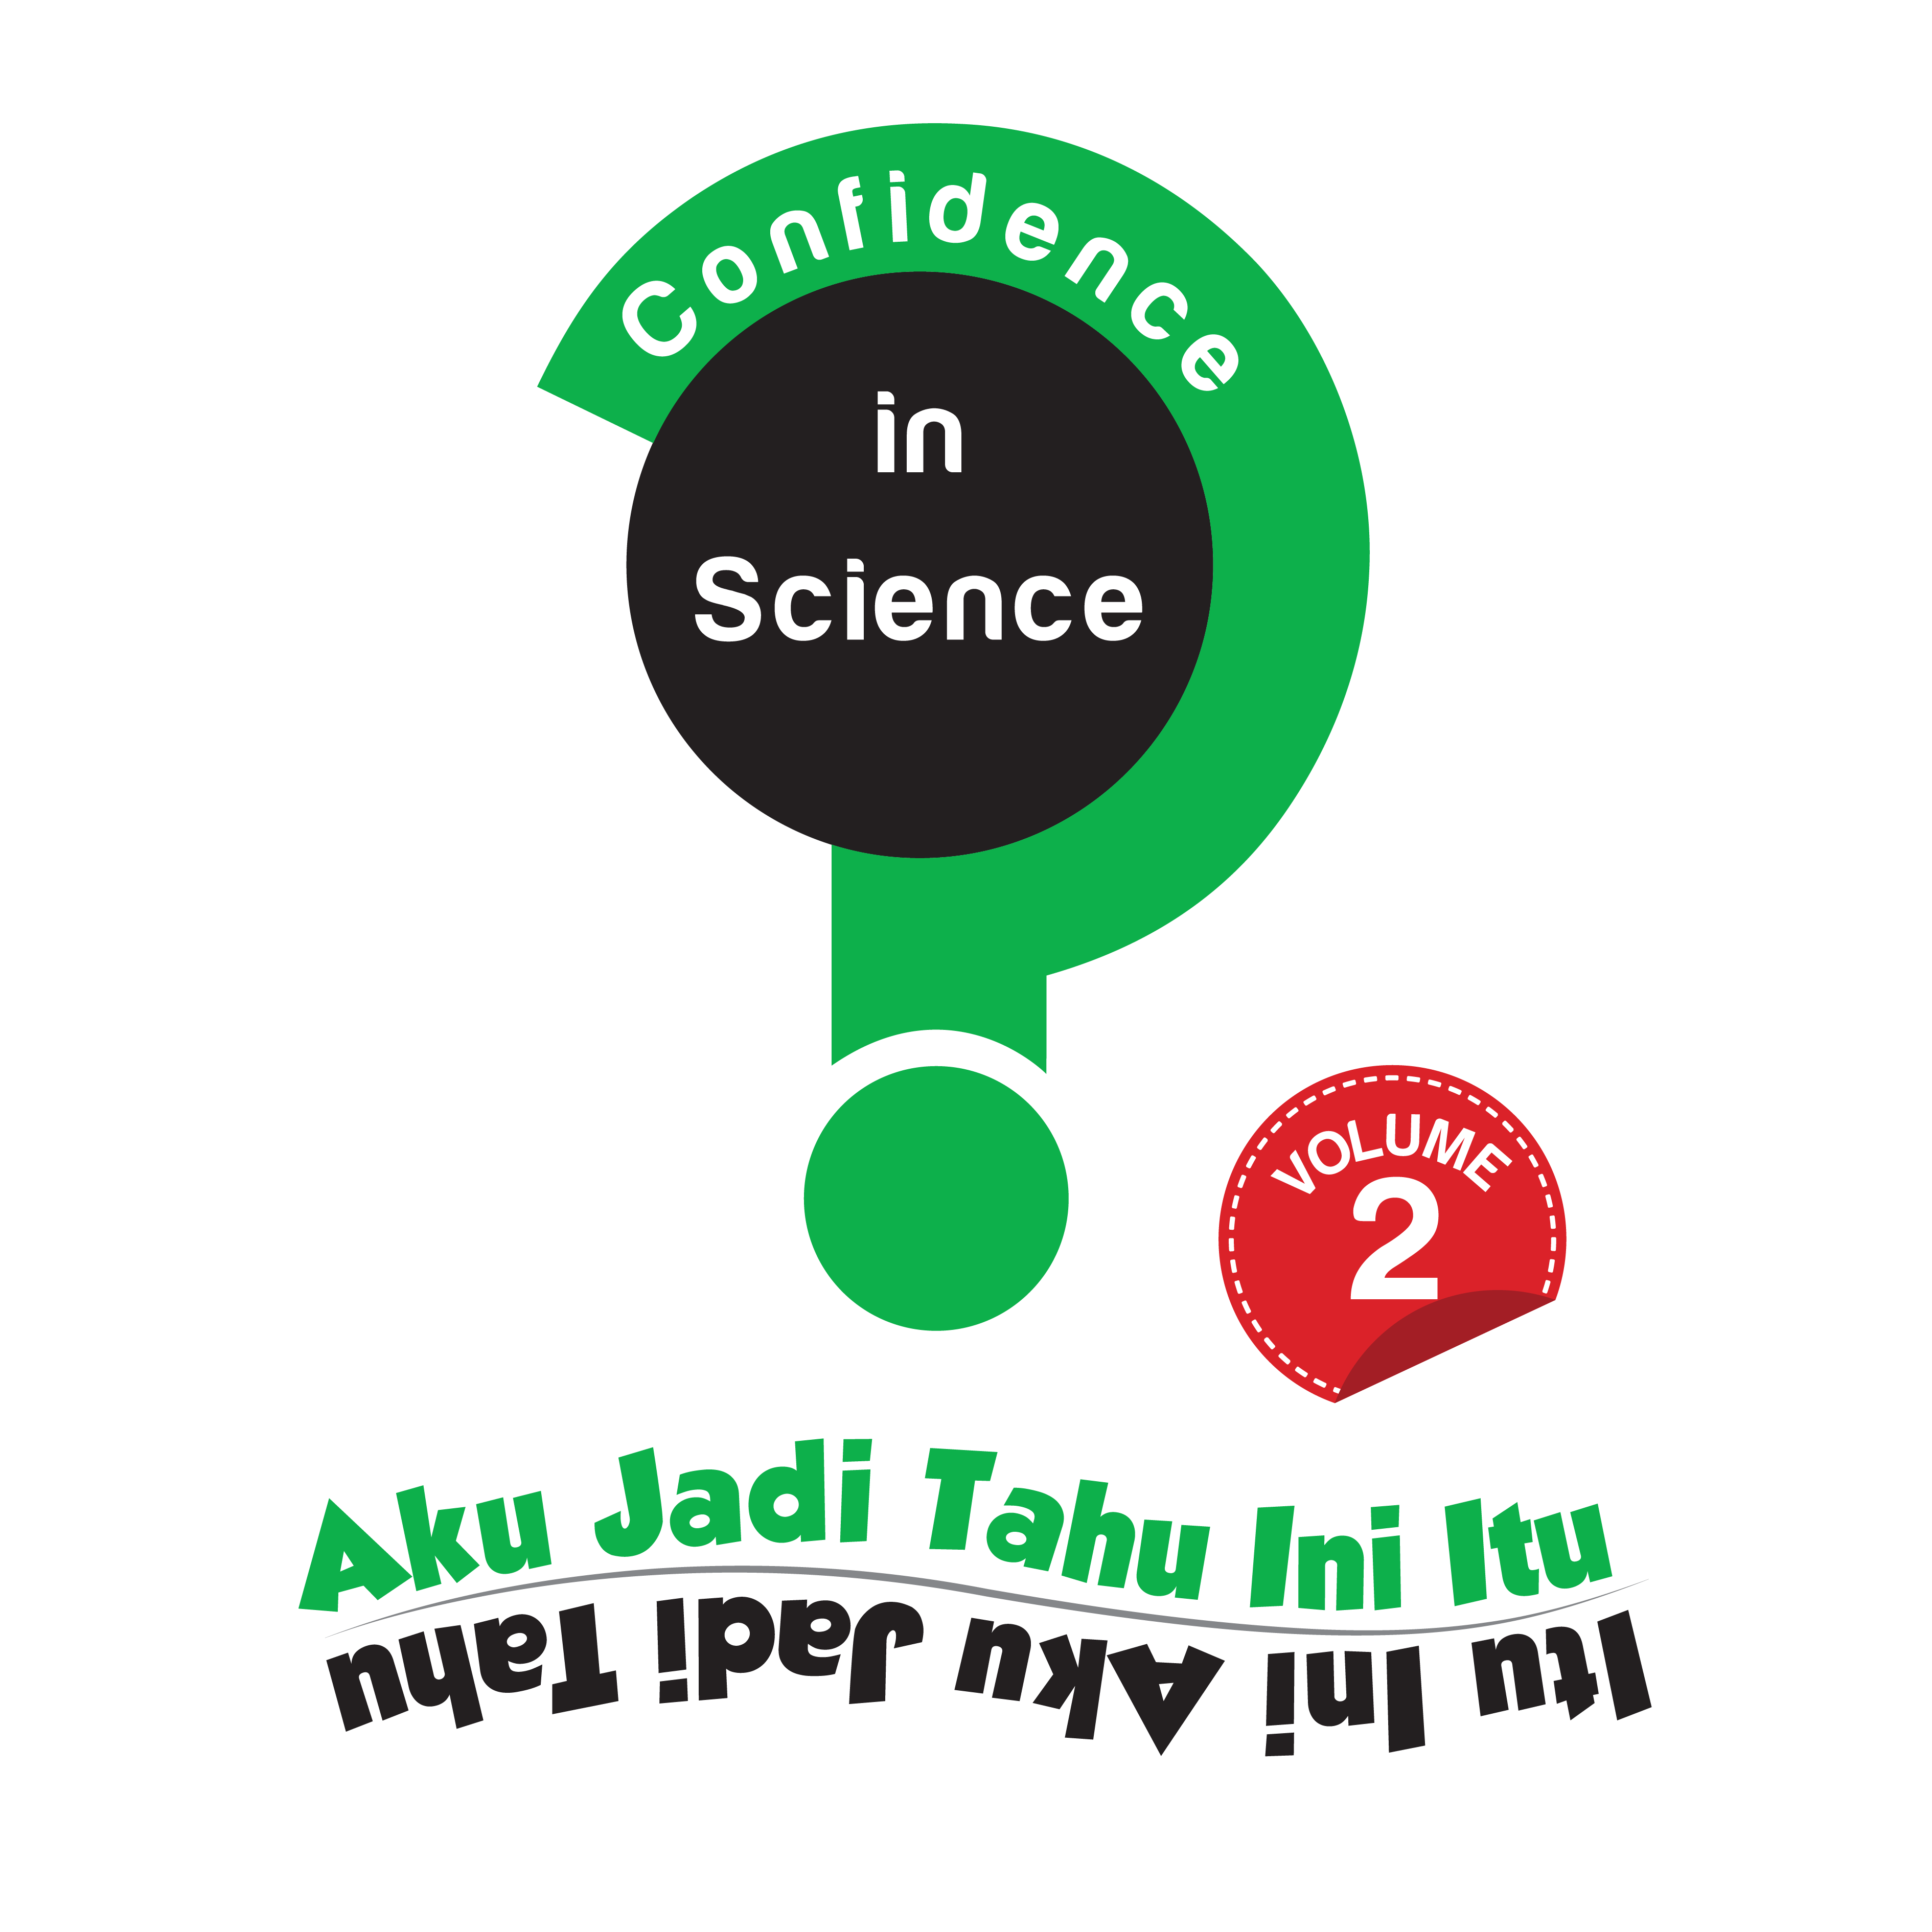 confidence in science